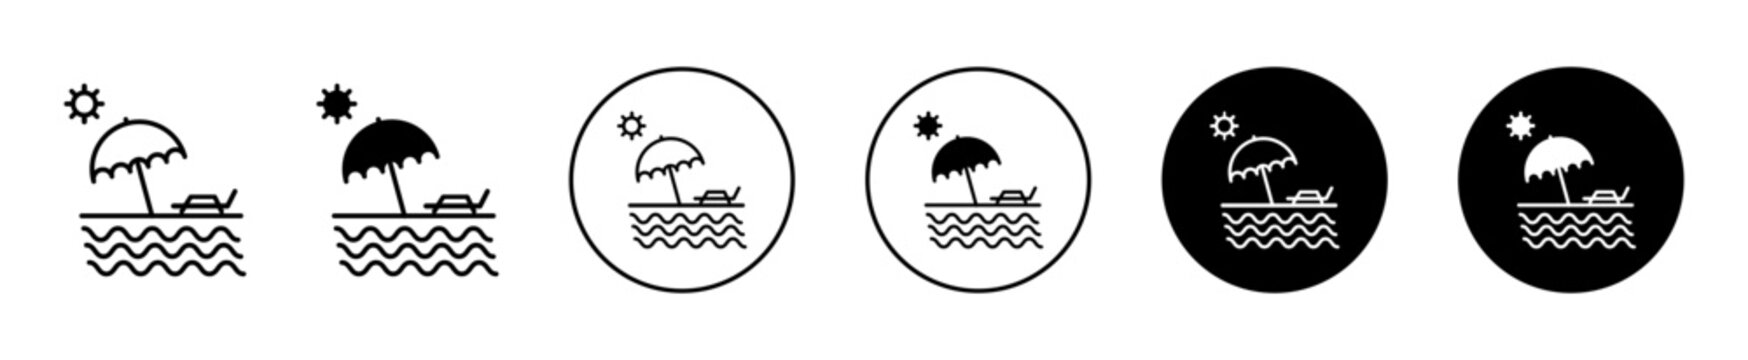 Beach icon set. sea beach with umbrella vector symbol in black filled and outlined style.
